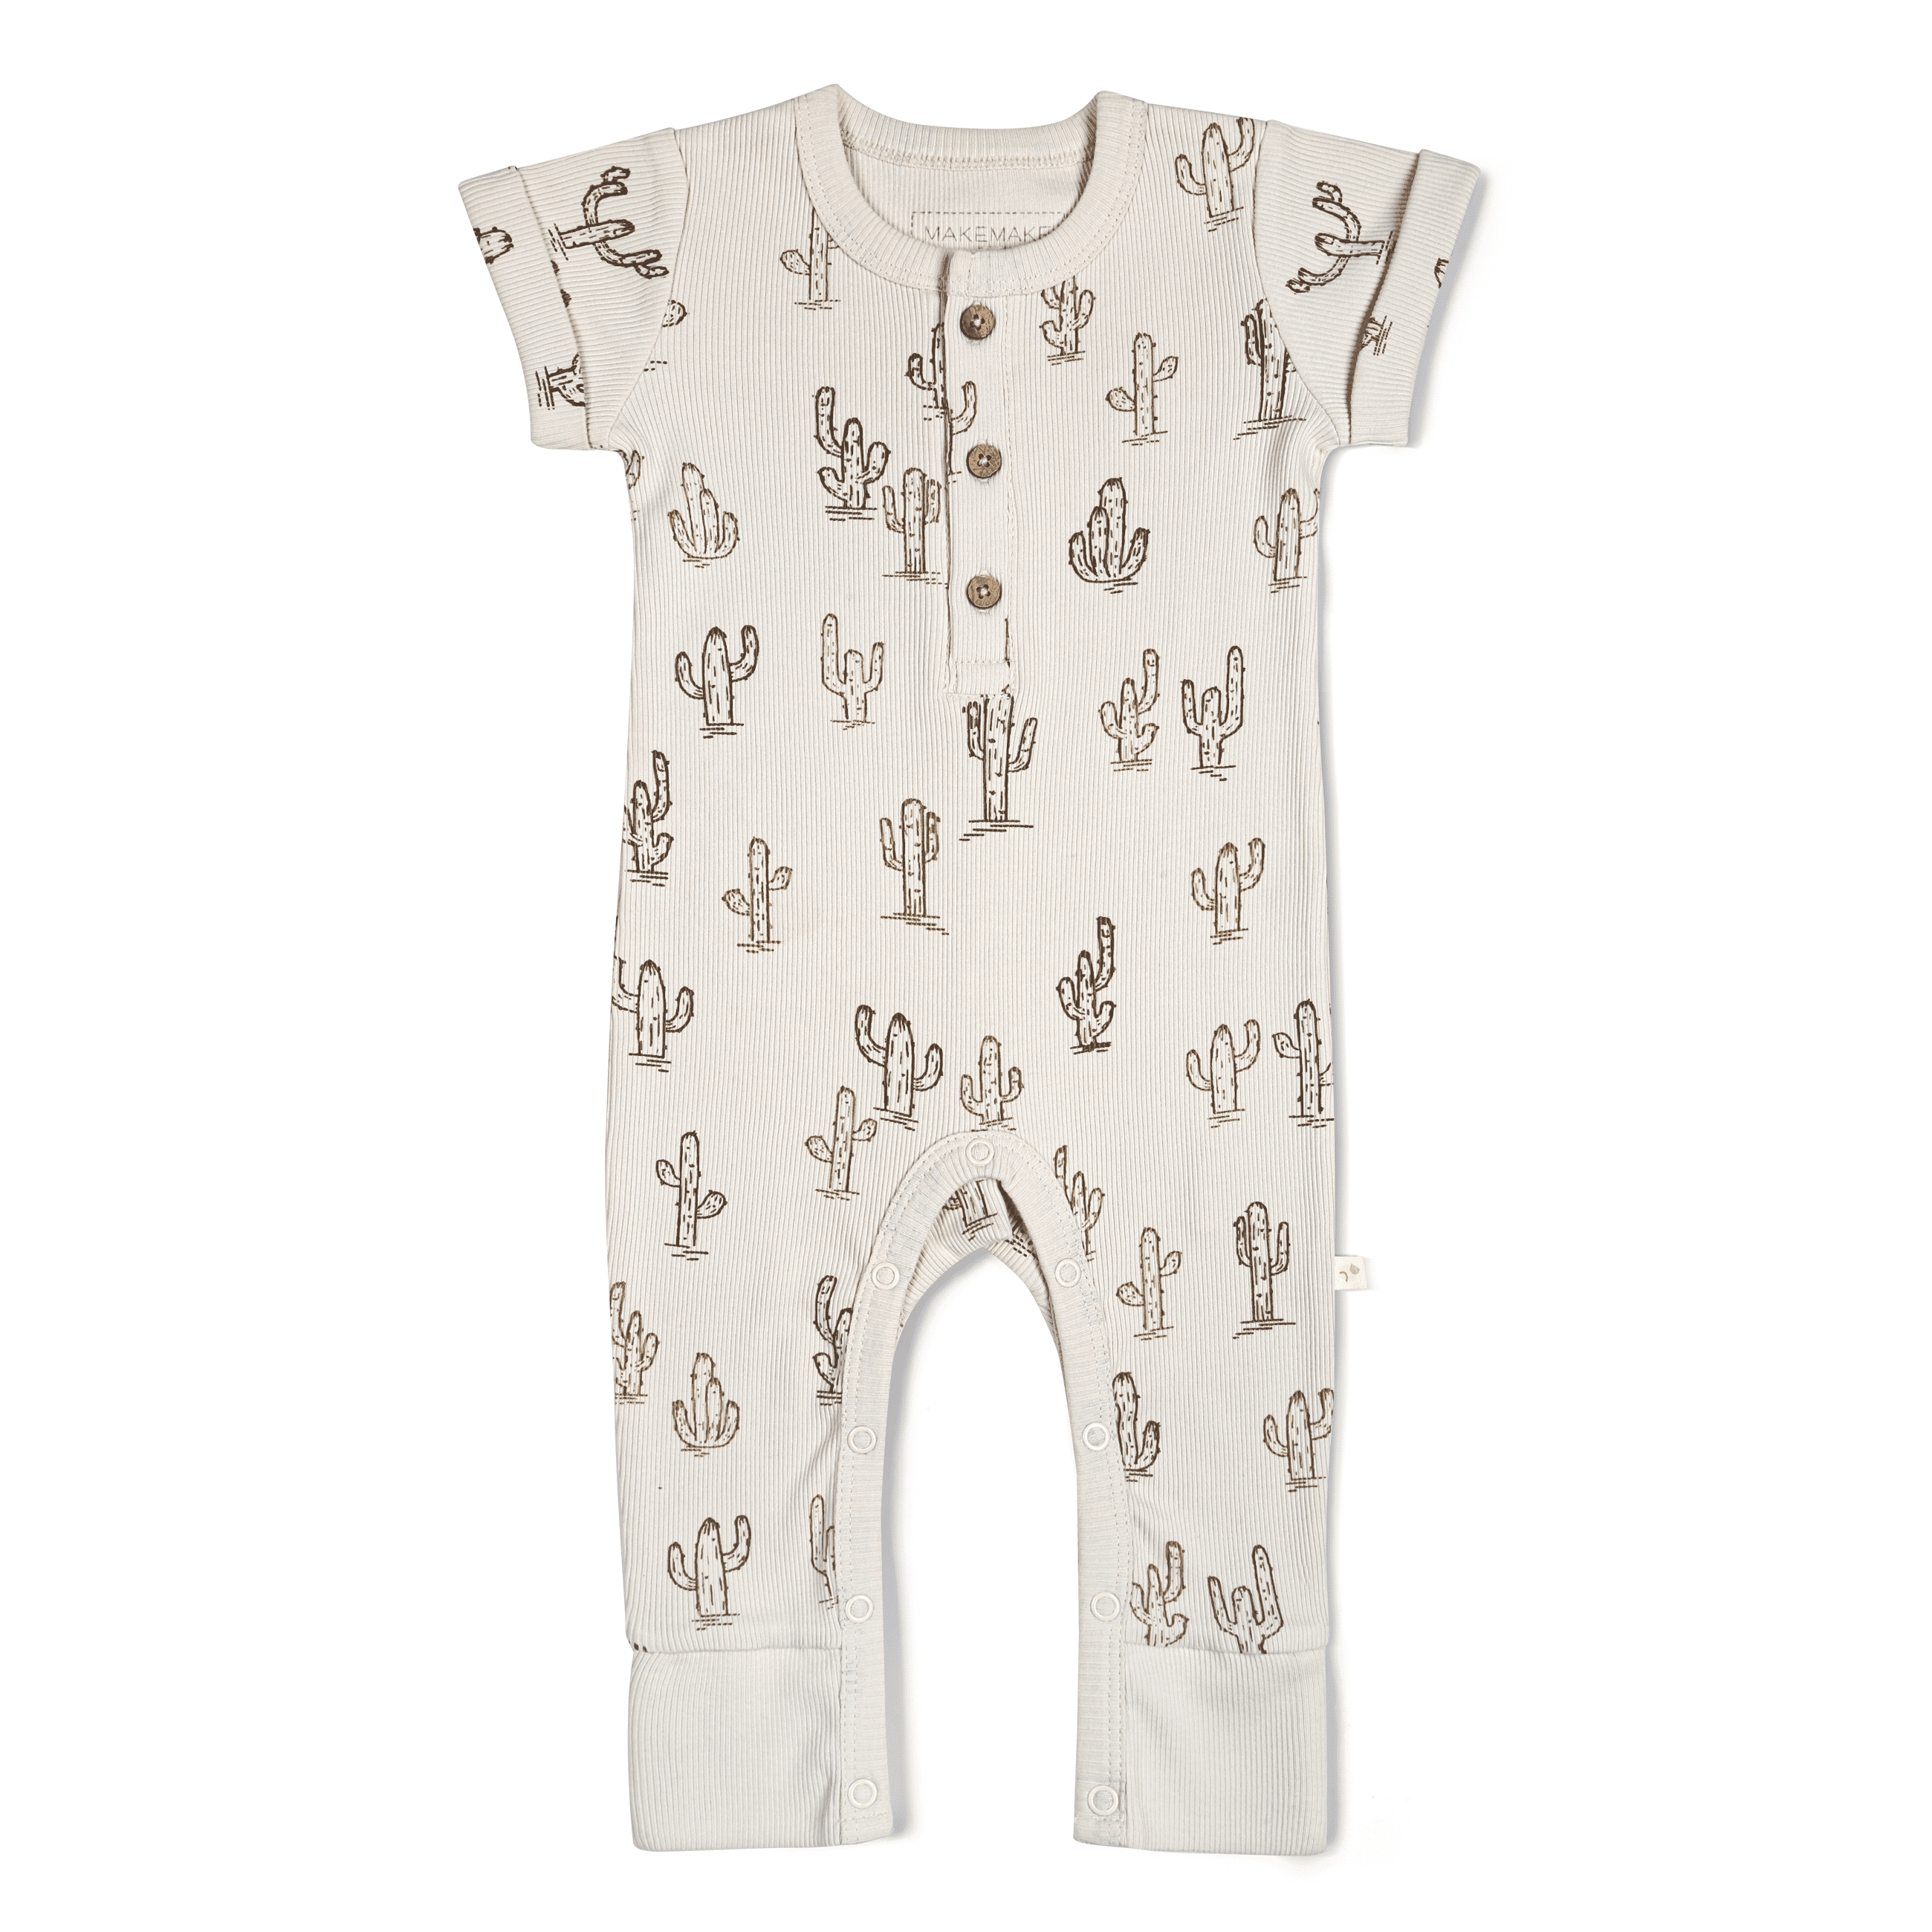 A baby's beige onesie with an all-over black cactus print, featuring short sleeves, snap buttons from neck to leg, and closed feet. Suitable for a baby boy or girl.
Organic Short Sleeve Button Romper - Cactus by Makemake Organics